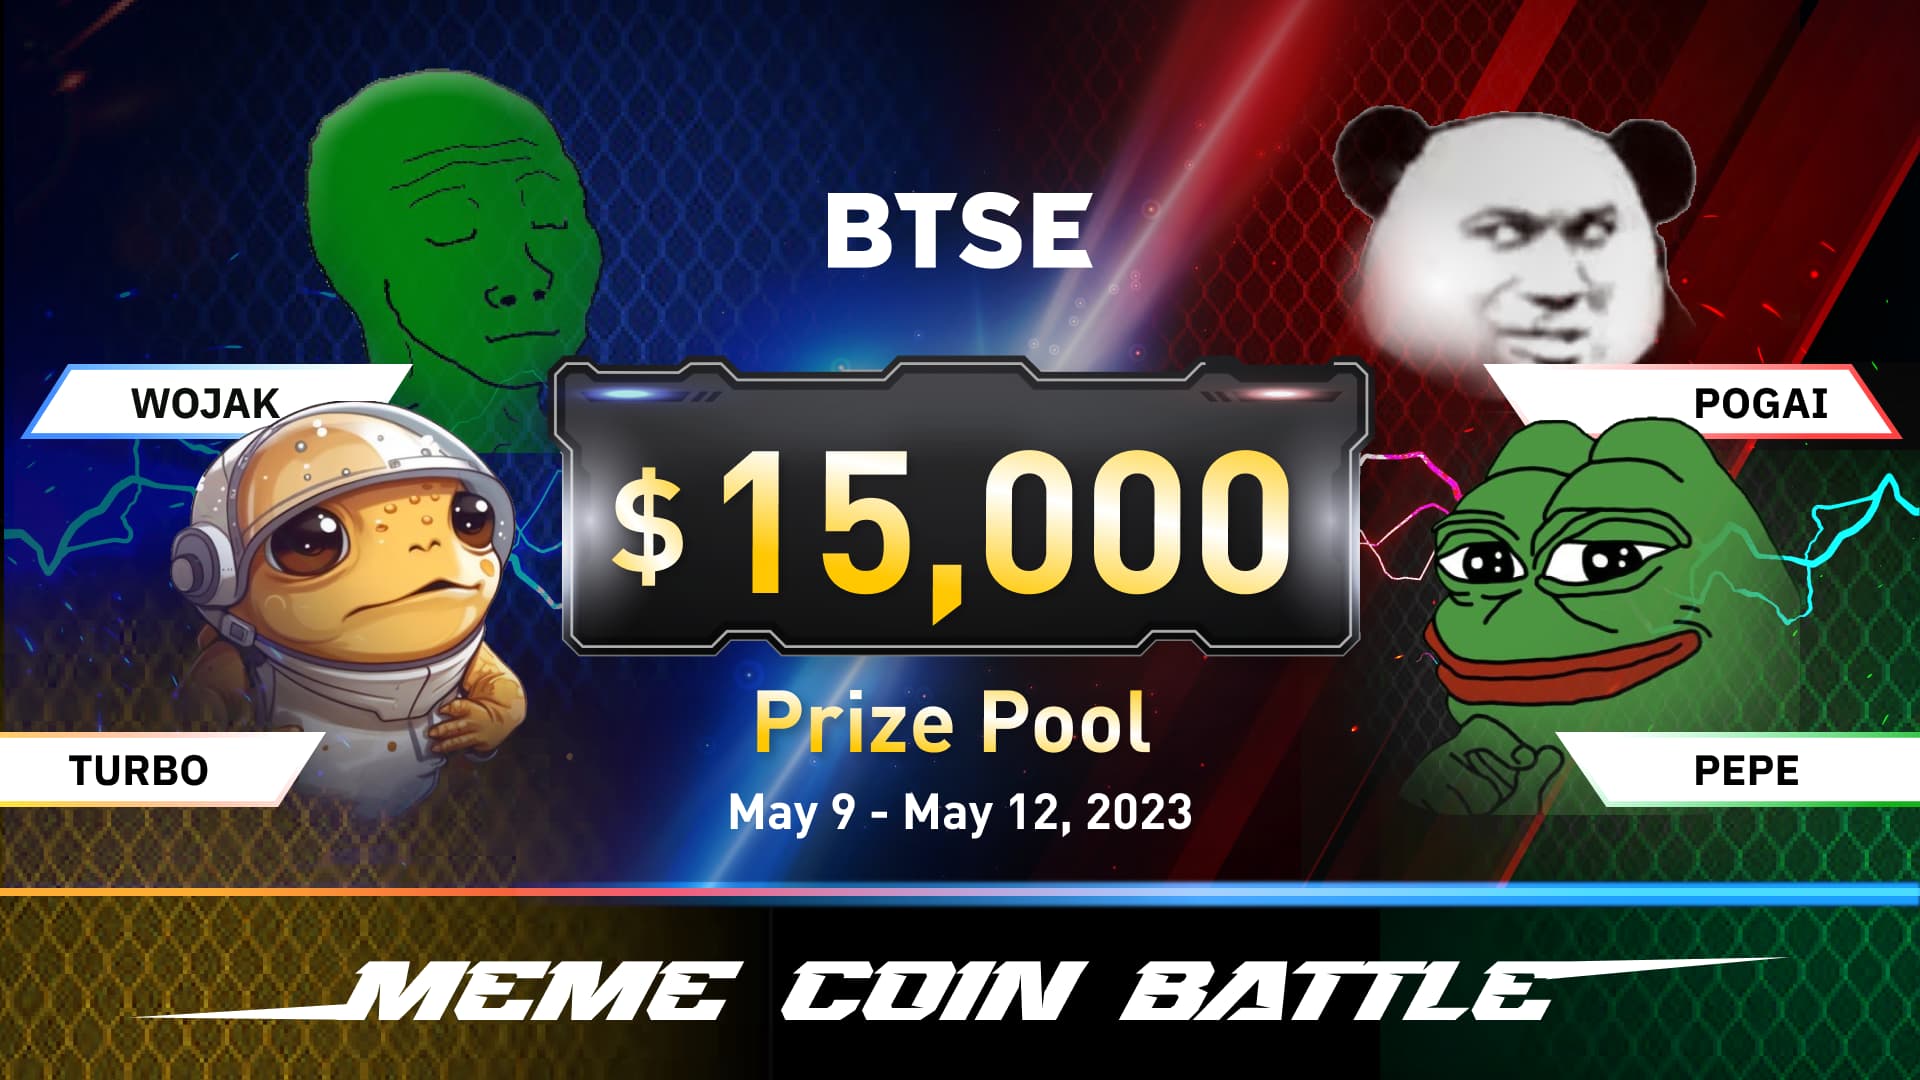 Join the BTSE Meme Coin Battle! $15,000 Prize Pool Up for Grabs